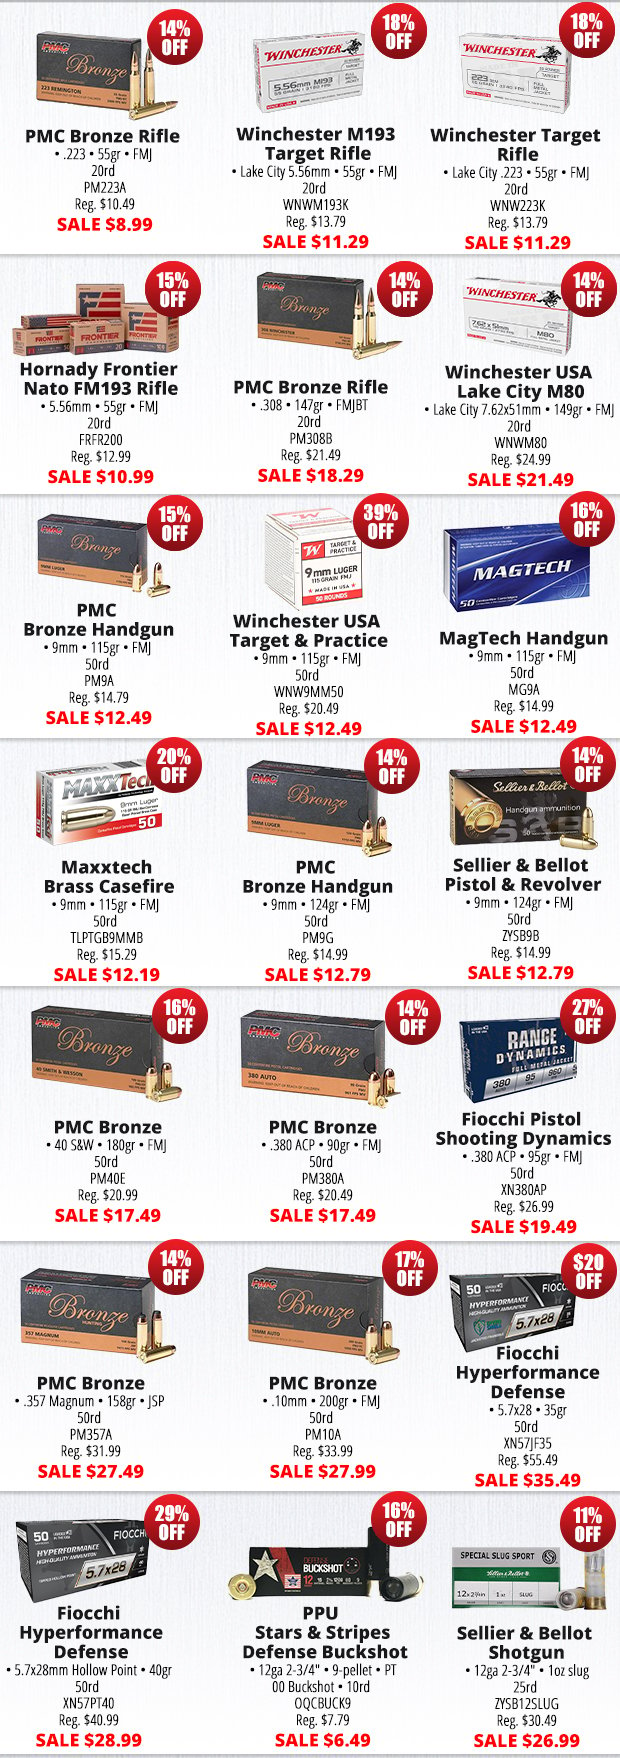 Kick Off Your Day With Ammo Deals Up To 39% Off!